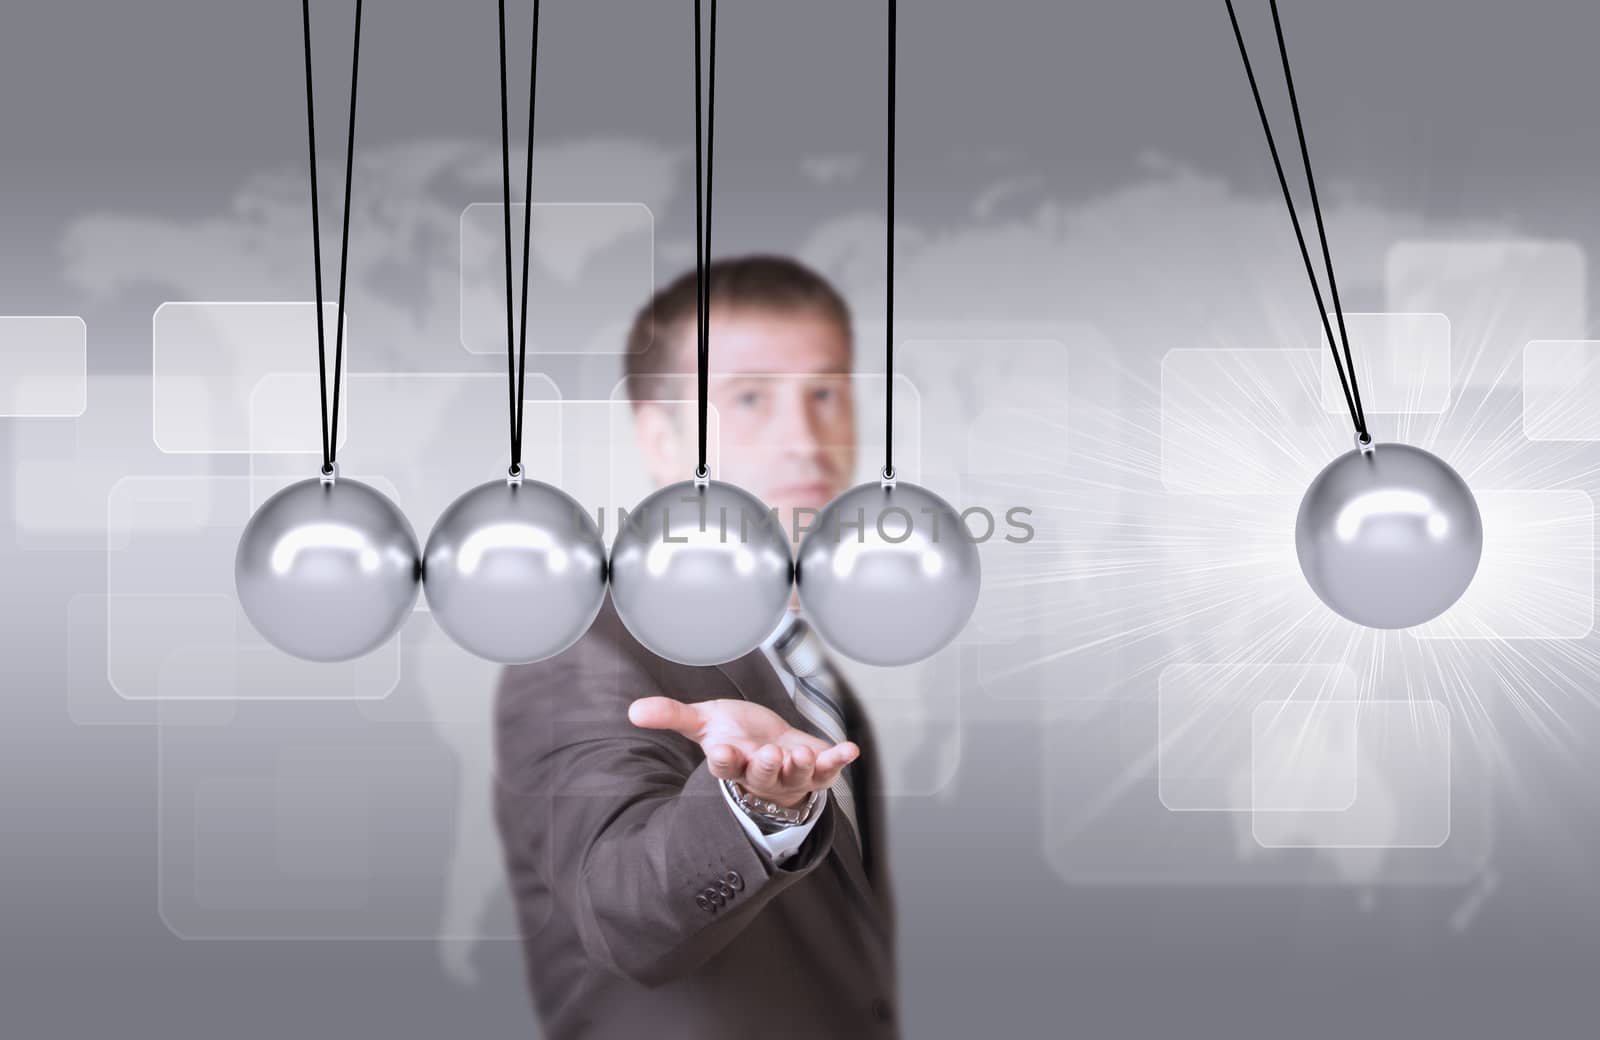 Businessman in suit hold Newtons cradle. World map and rectangles as backdrop